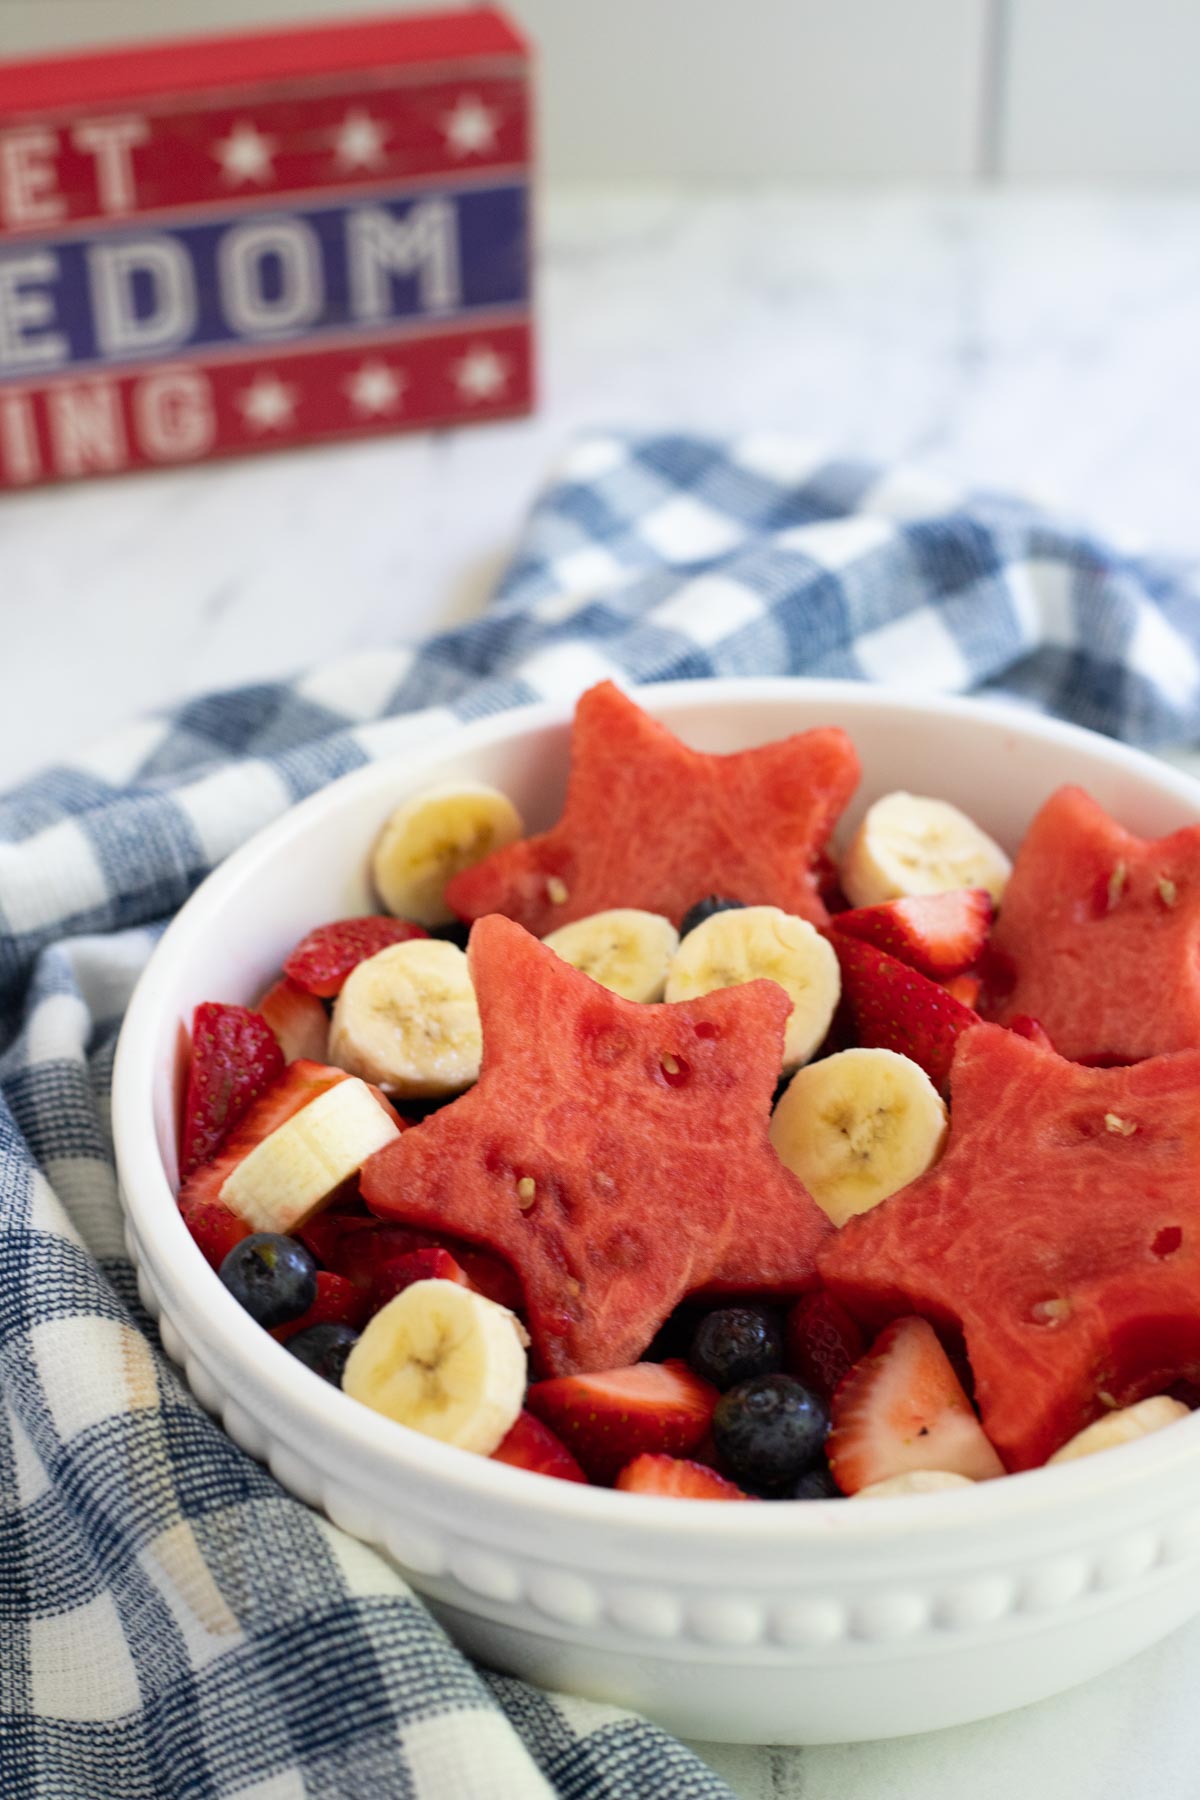 Strawberry, blueberry fruit salad with sliced bananas and watermelon stars. 
